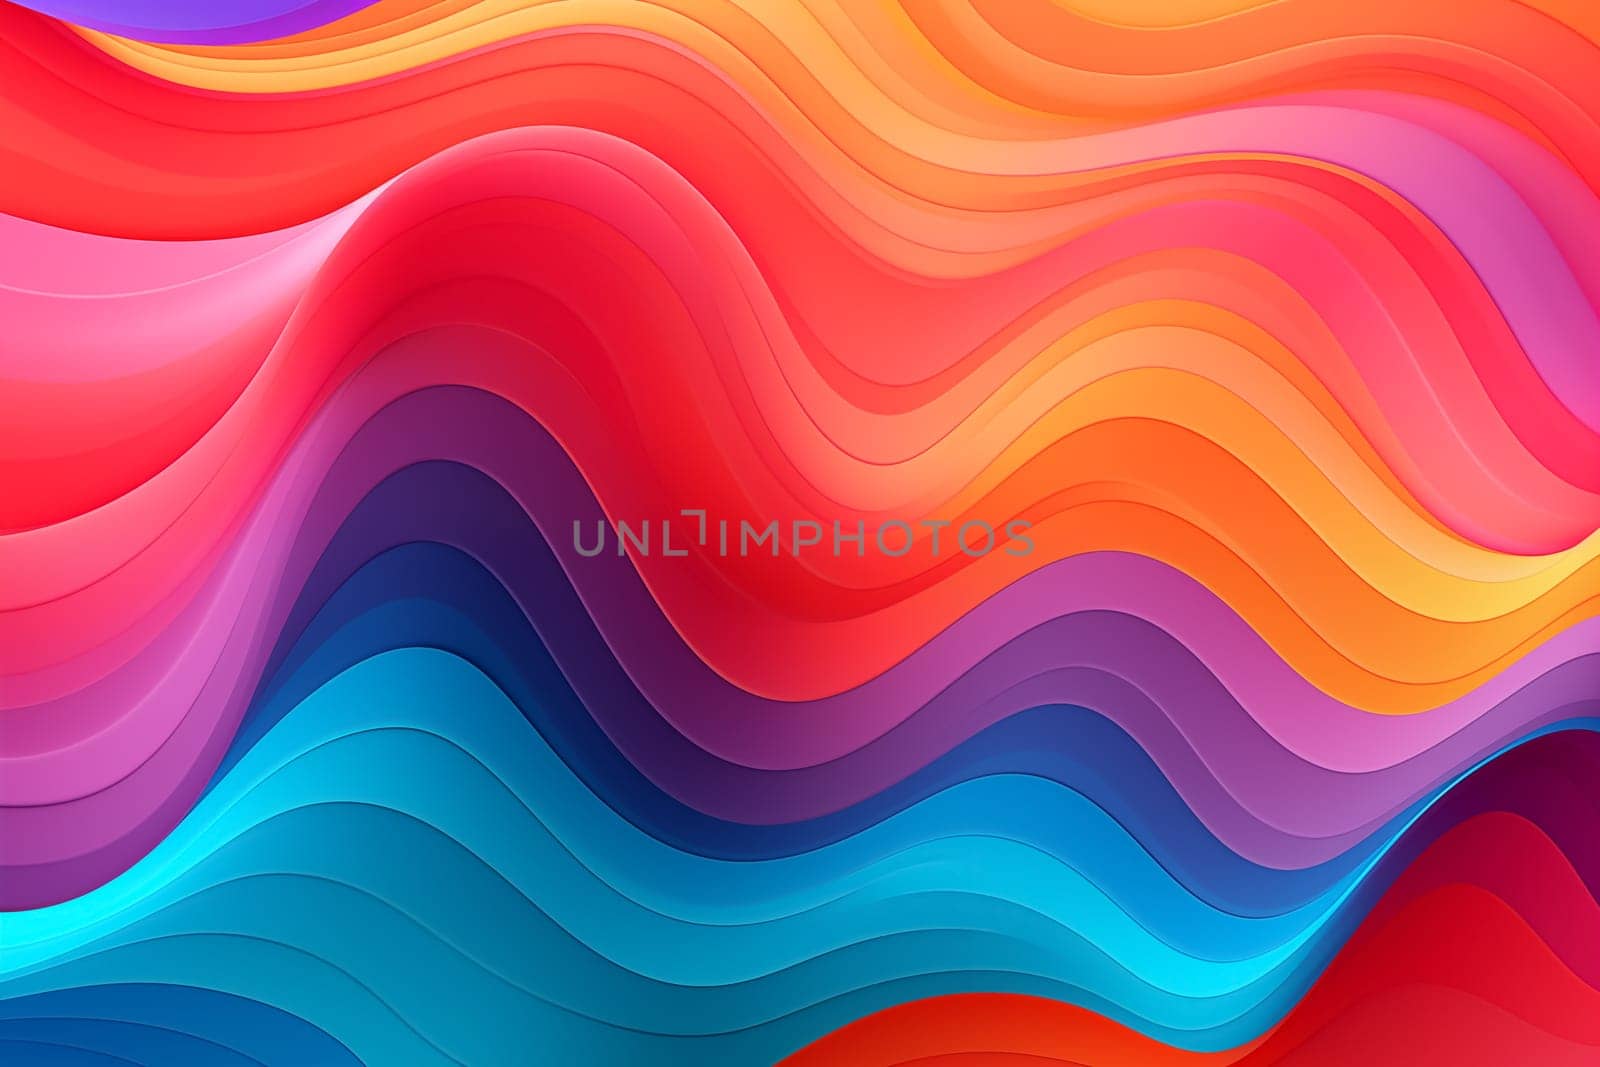 A colorful background with a wavy design in the middle. High quality photo